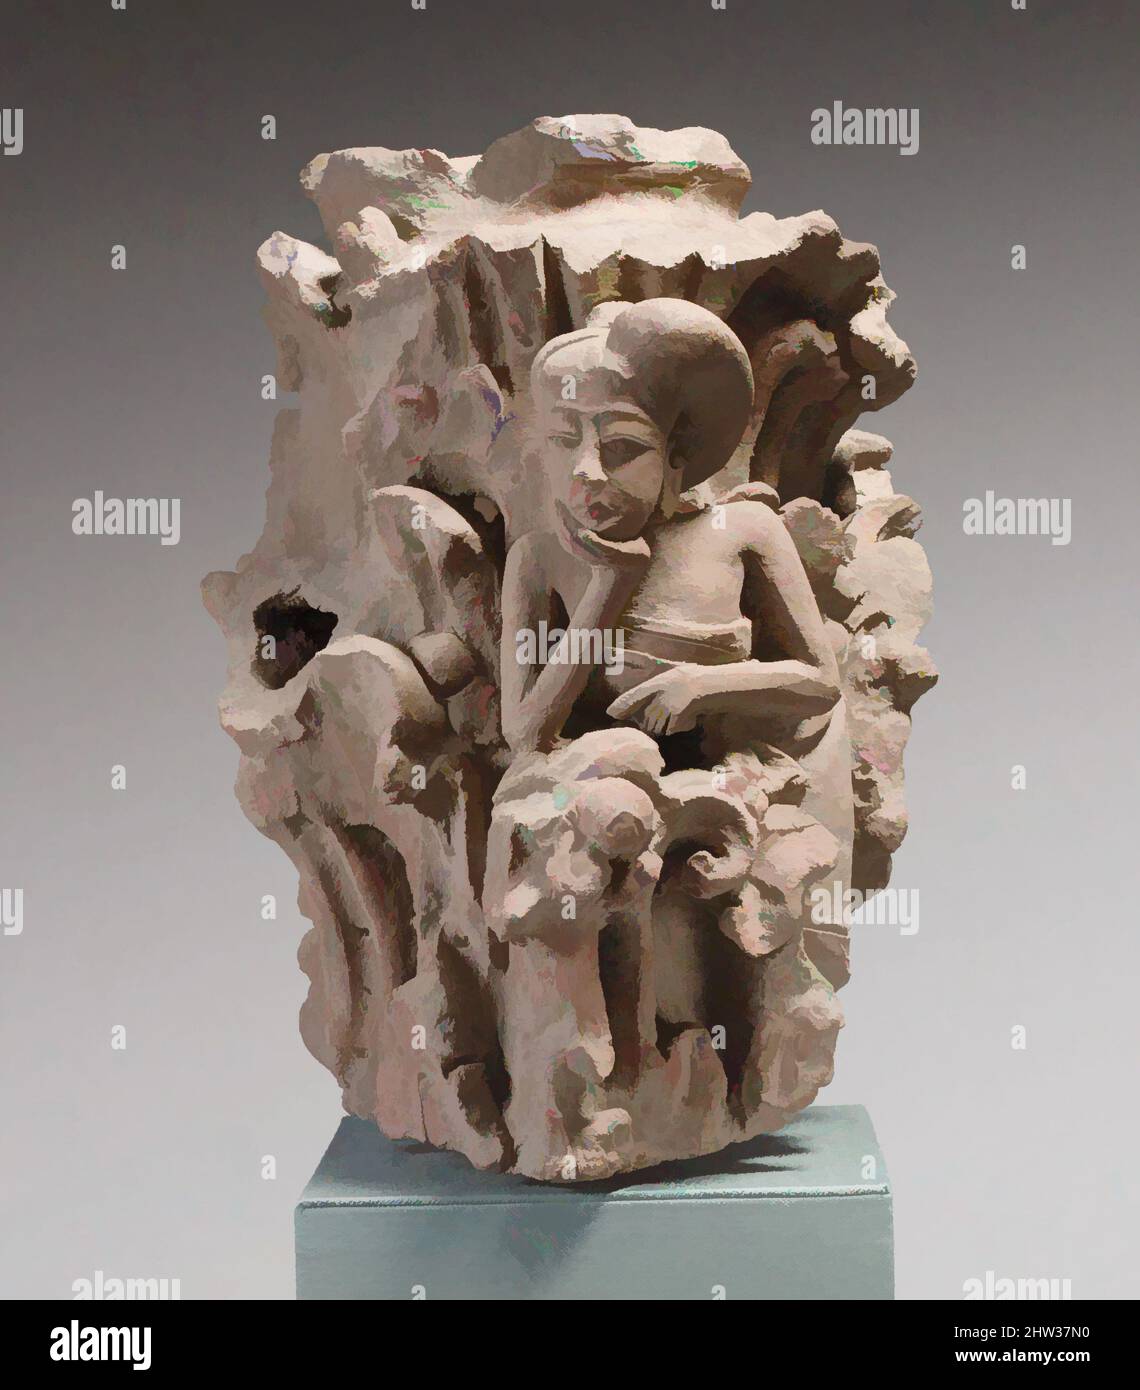 Art inspired by Column Surround with Pensive Woman, Eastern Javanese period, Majapahit kingdom, 14th–15th century, Indonesia (Java), Terracotta, H. 10 3/4 in. (27.3 cm), Sculpture, Ornamental roof tiles often decorated houses in the capital of the East Javanese kingdom of Majapahit, Classic works modernized by Artotop with a splash of modernity. Shapes, color and value, eye-catching visual impact on art. Emotions through freedom of artworks in a contemporary way. A timeless message pursuing a wildly creative new direction. Artists turning to the digital medium and creating the Artotop NFT Stock Photo